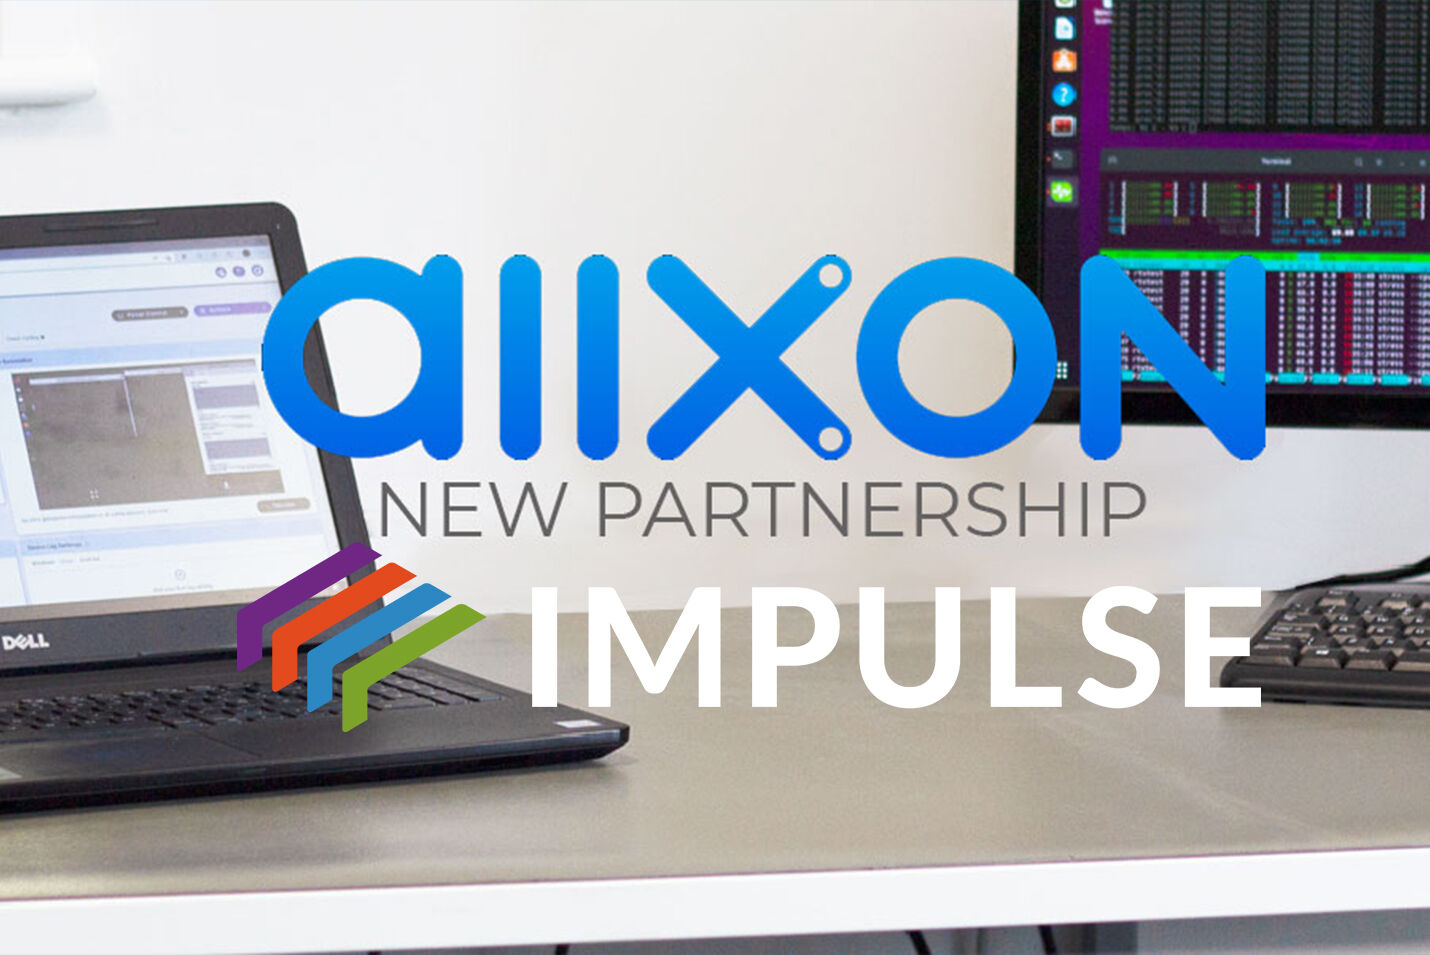 Allxon and Impulse Embedded announce distribution partnership enabling remote device management solutions for Nvidia Jetson, x86 and ARM computer architectures